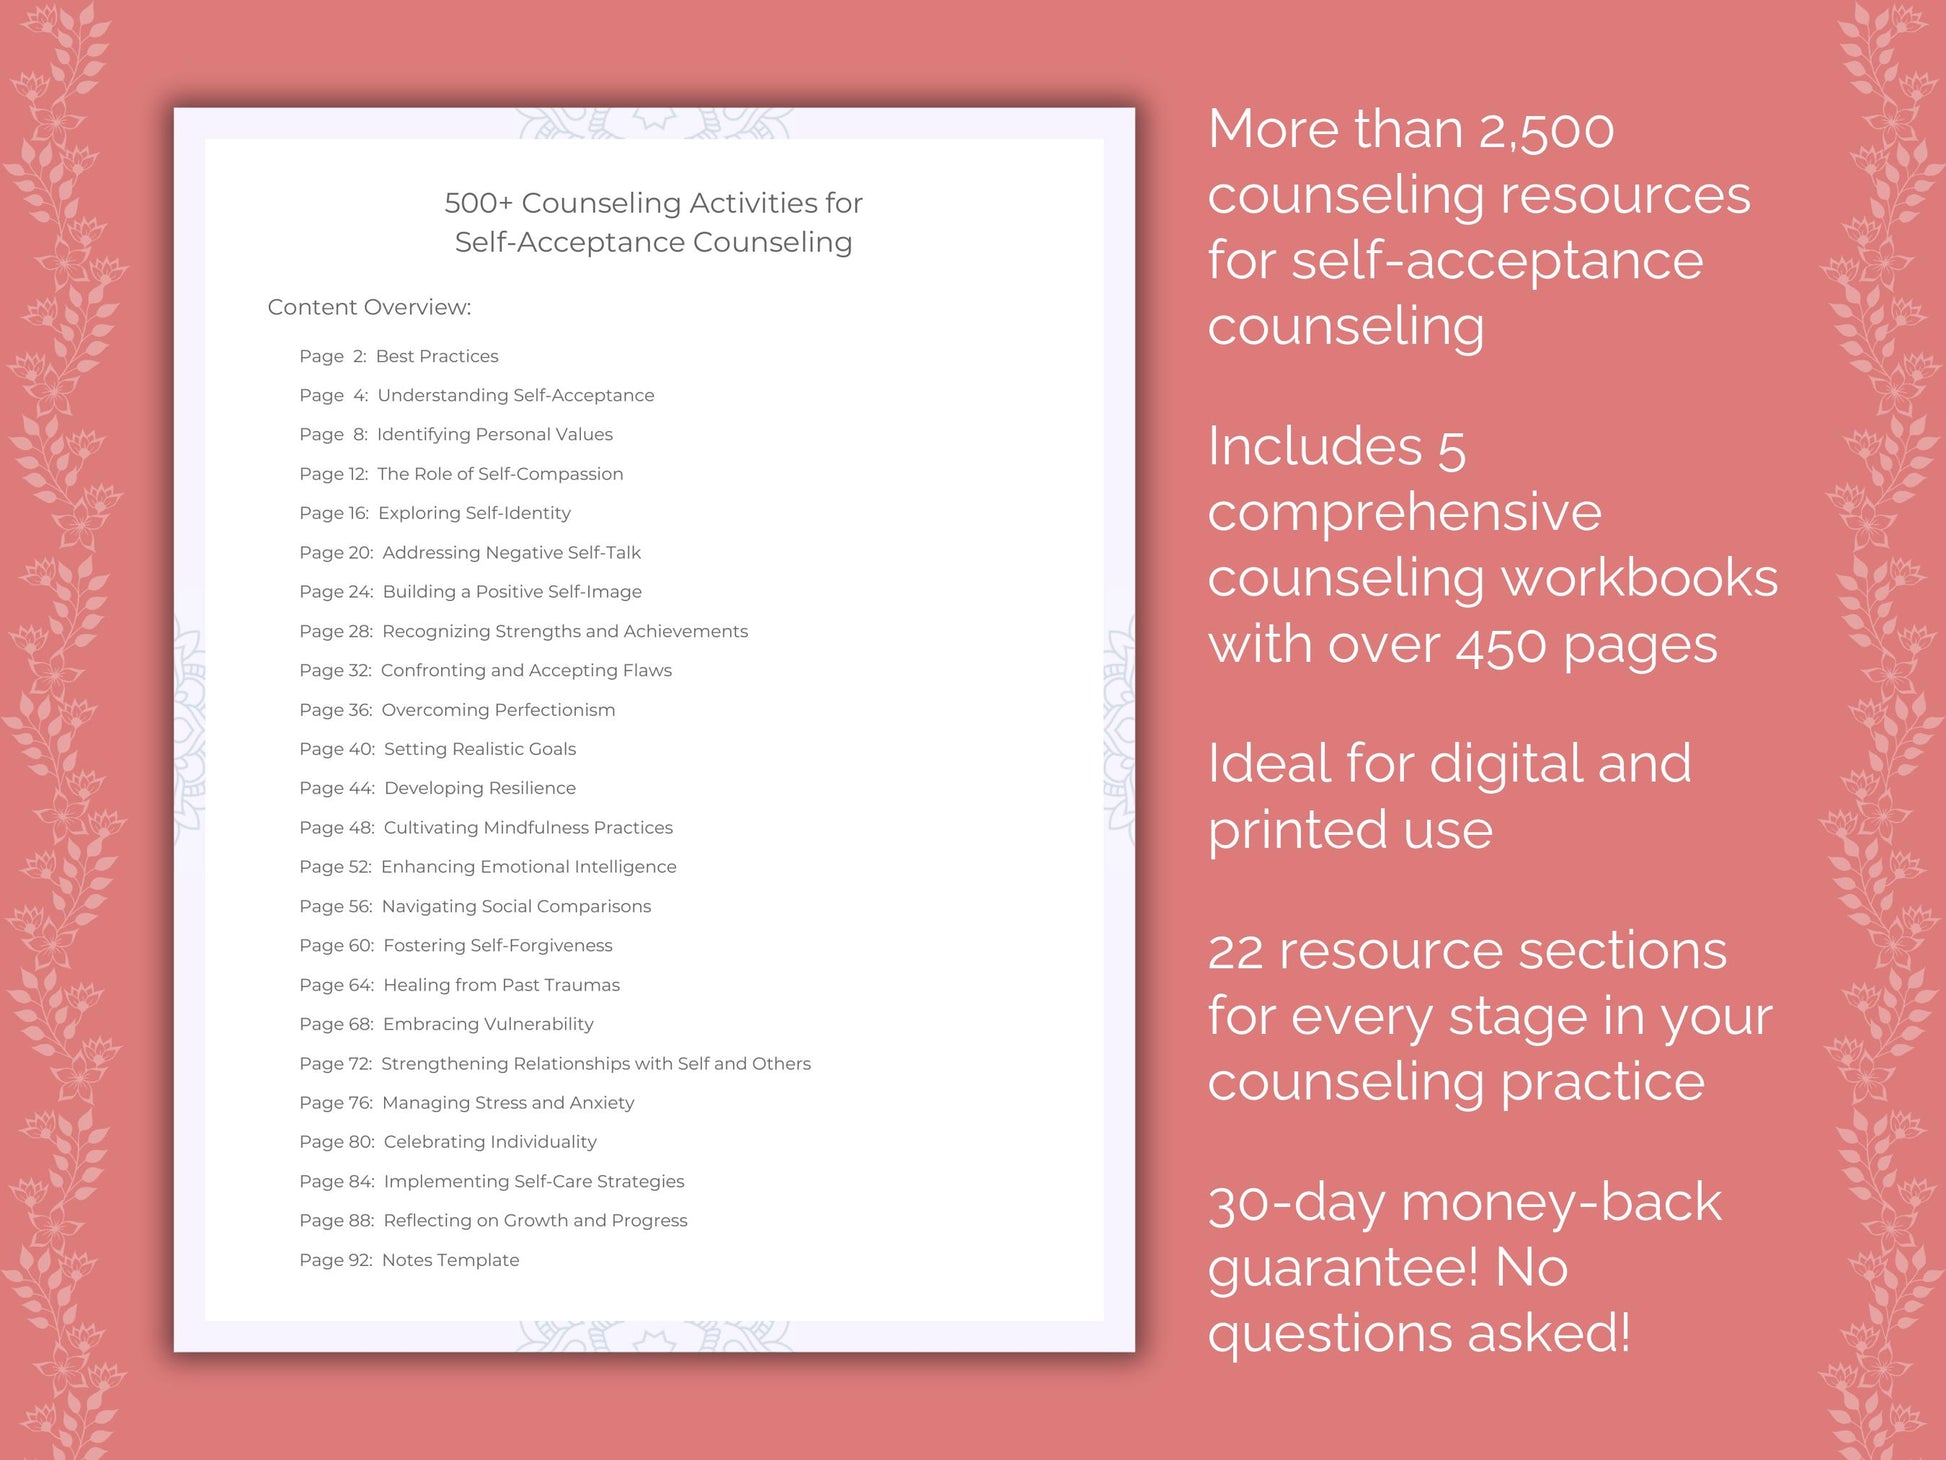 Counseling, Worksheet, Self-Acceptance Tool, Content, Therapist, Workbook, Counselor, Template, Mental Health, Self-Acceptance, Resource, Self-Acceptance Idea, Therapy